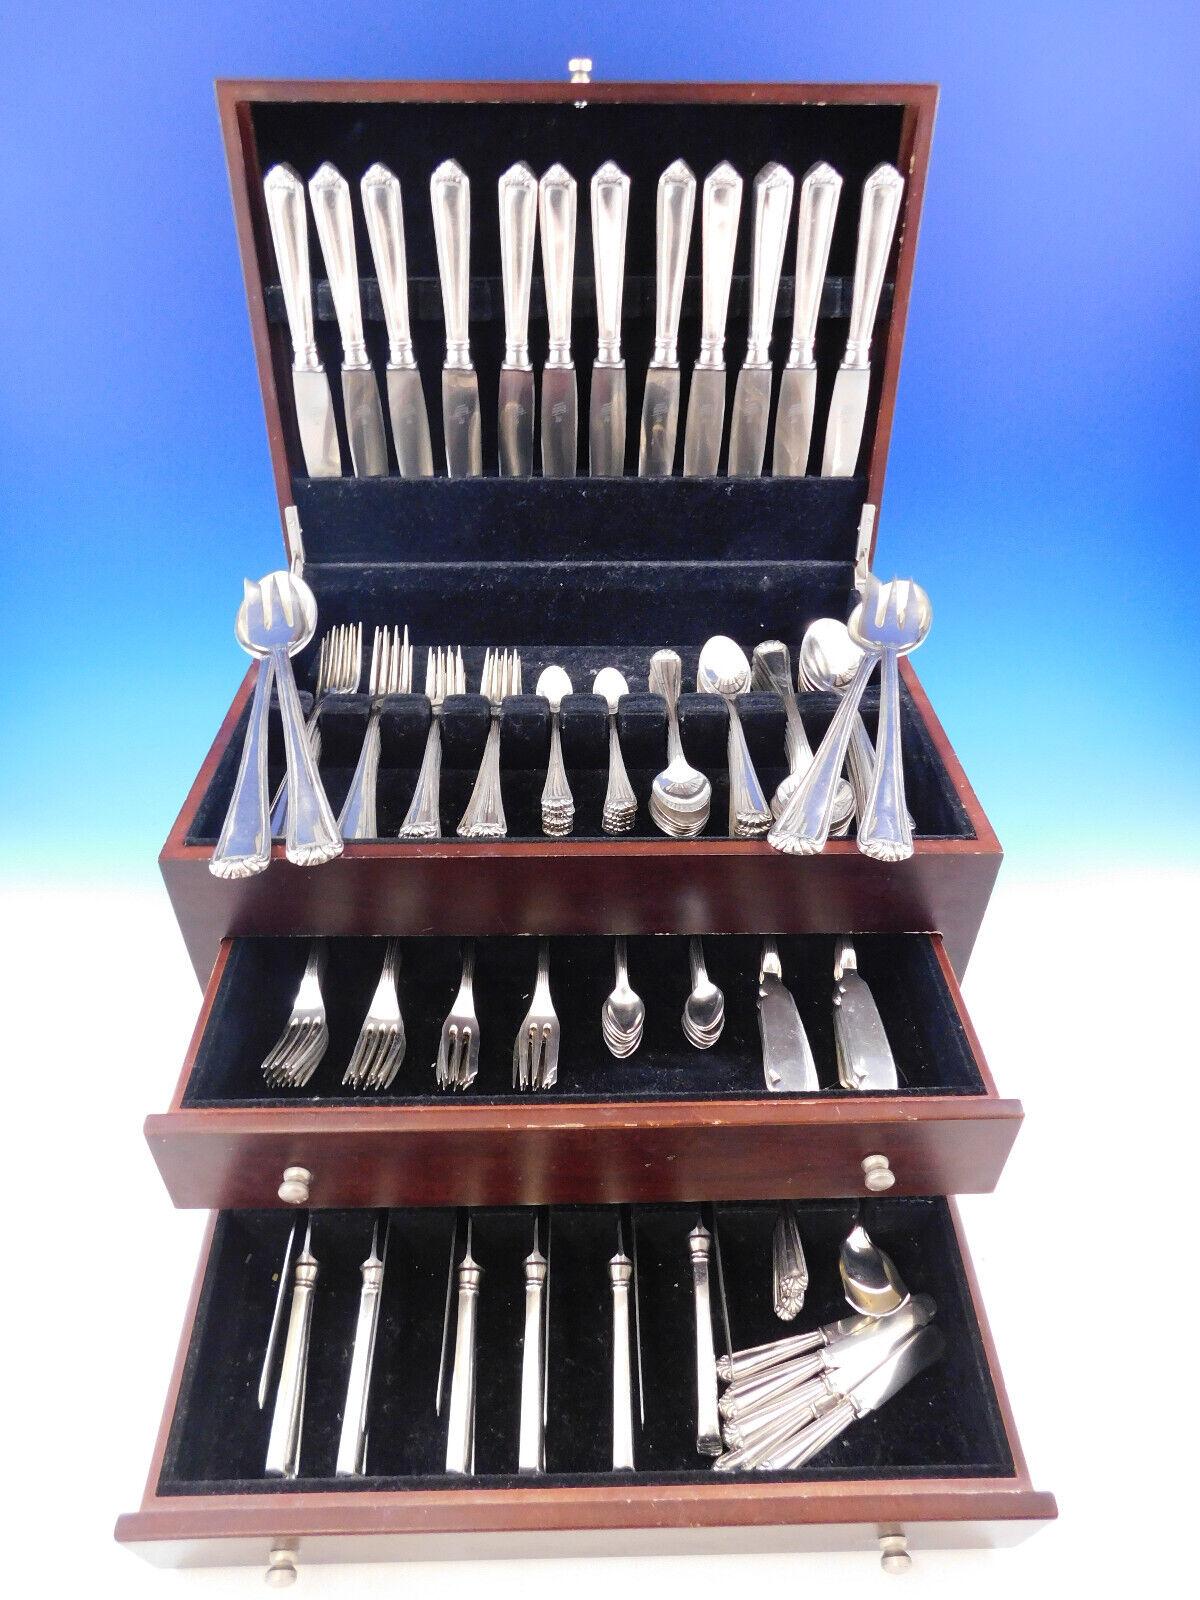 Monumental Portuguese .833 silver flatware set with scroll design. Pieces are well balanced and heavy. This set includes:

12 dinner knives w/stainless blades, 9 1/4